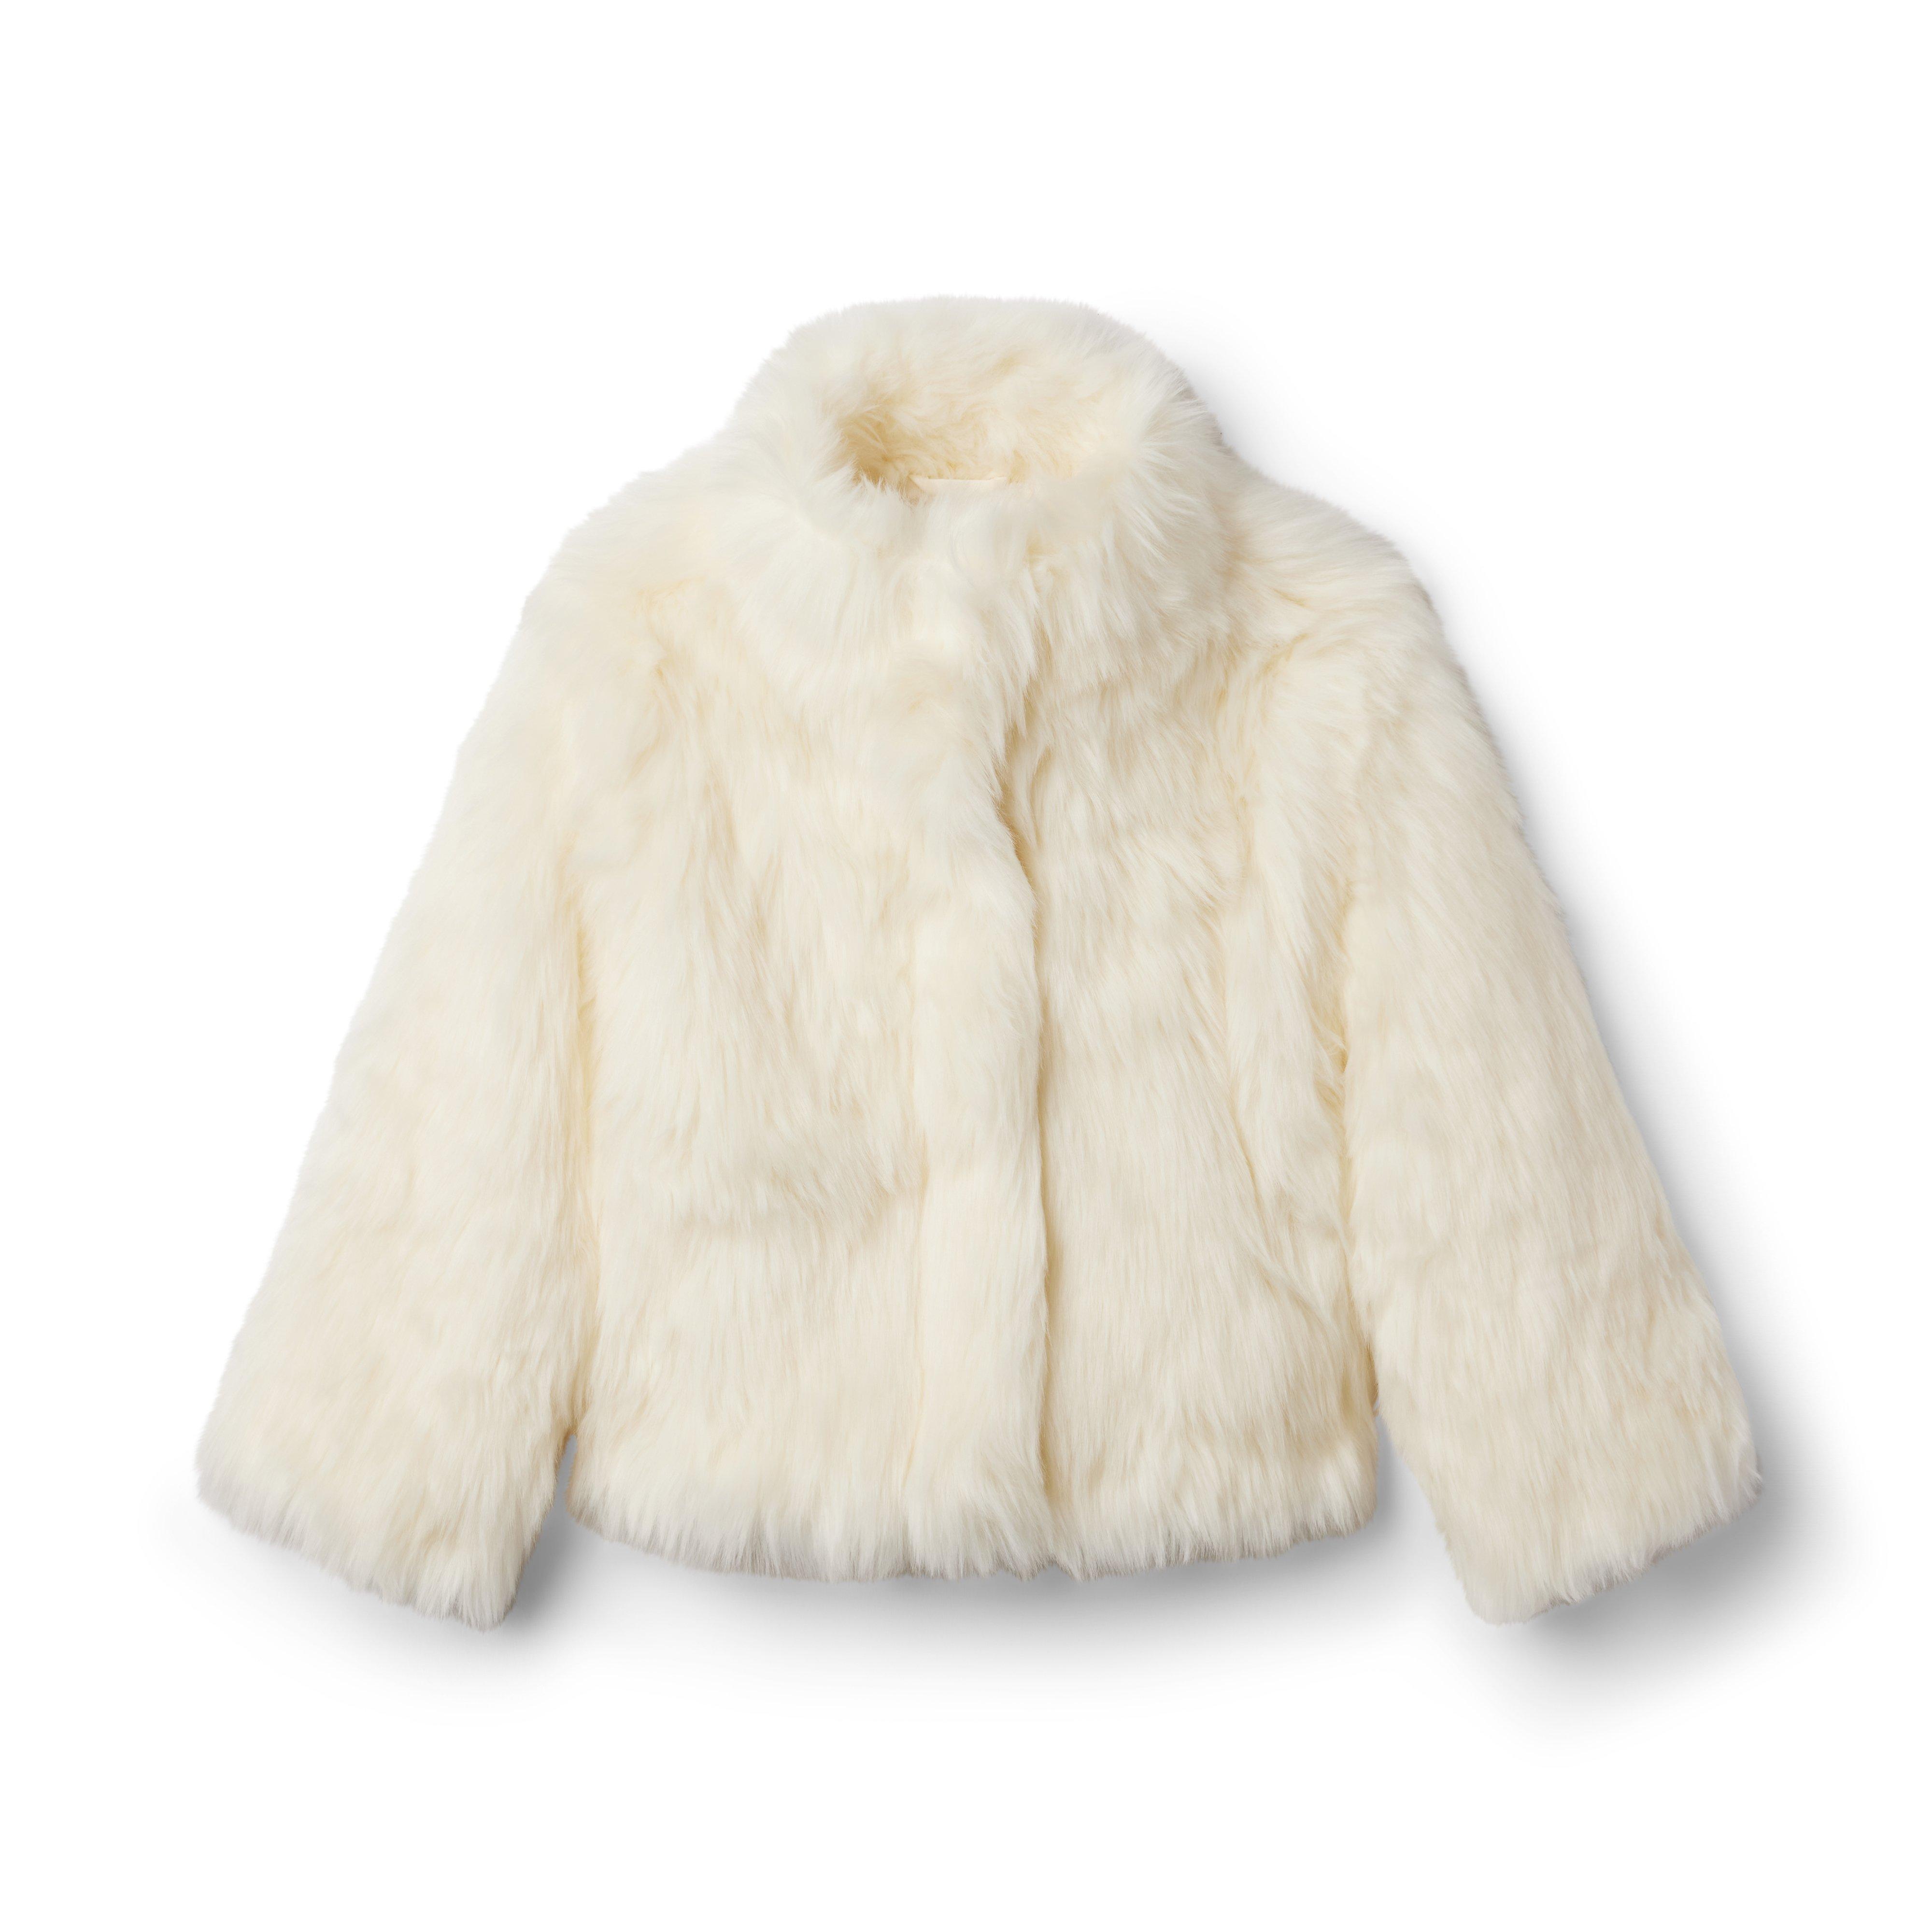 American Girl® x Janie and Jack Soft As Snow Faux Fur Jacket